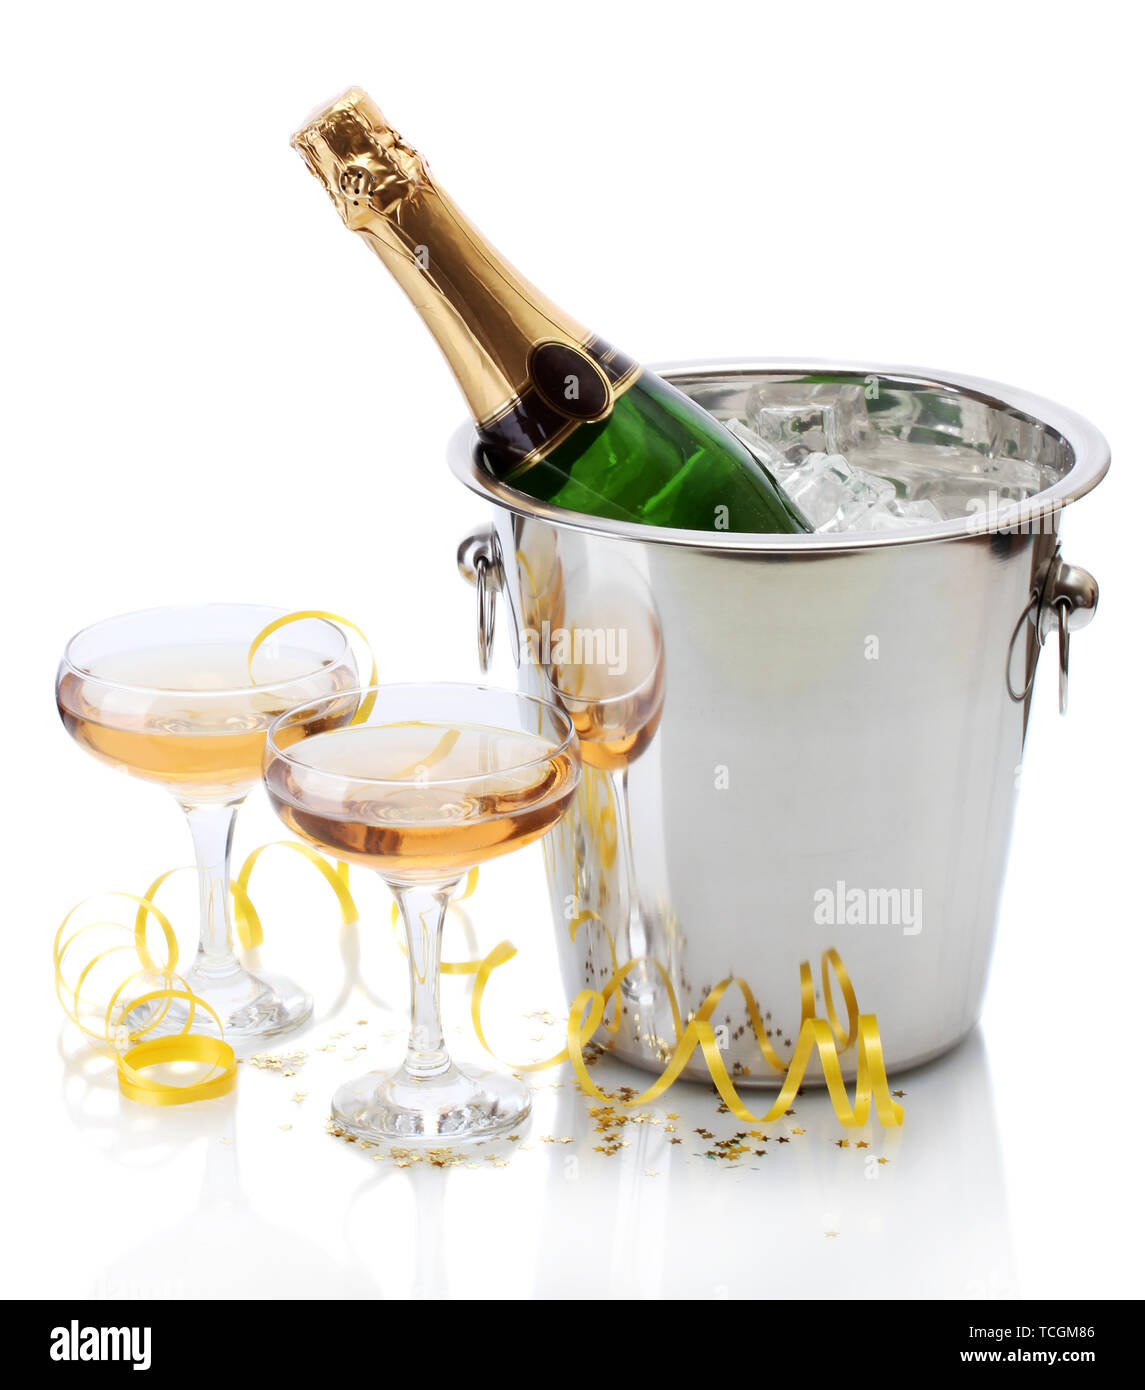 Champagne bottle in bucket with ice and glasses of champagne, isolated on  white Stock Photo - Alamy